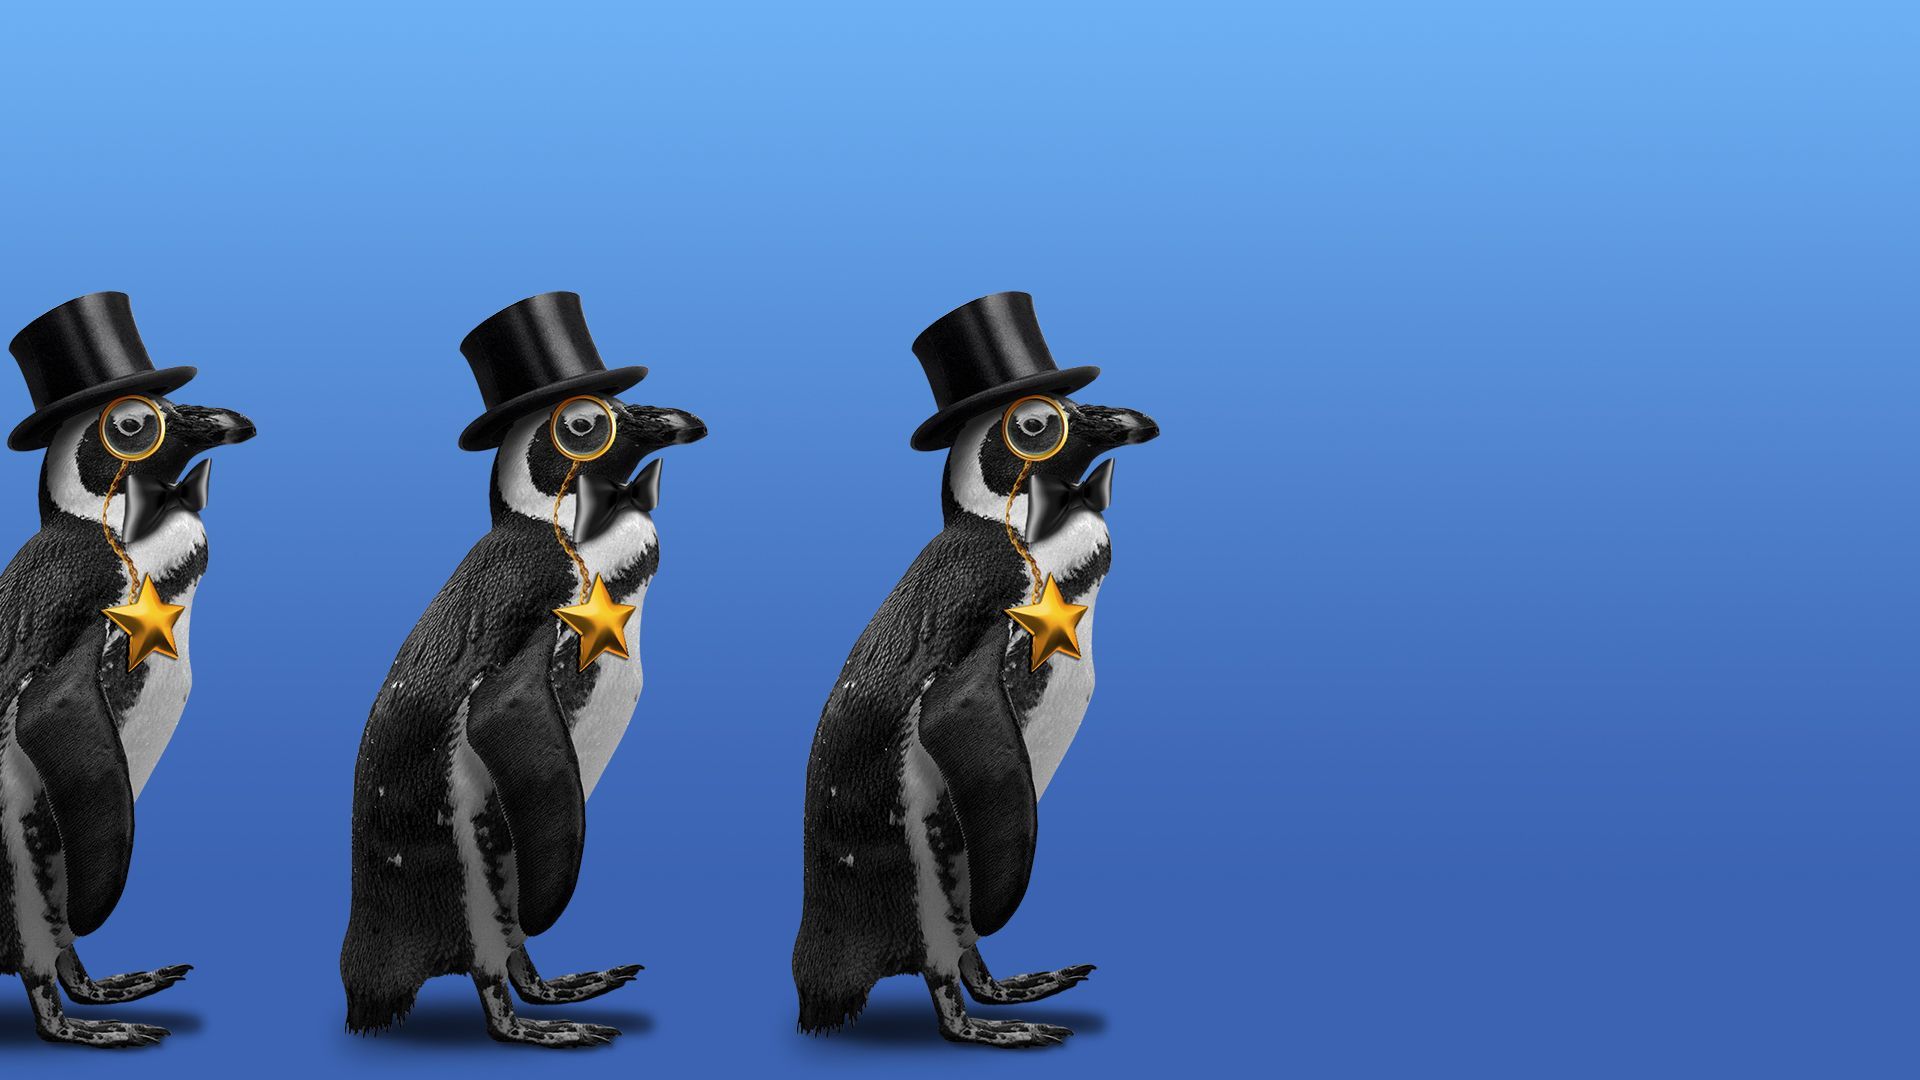 Illustration of a marching line of penguins wearing gold stars, top hats, monocles, and bow ties.